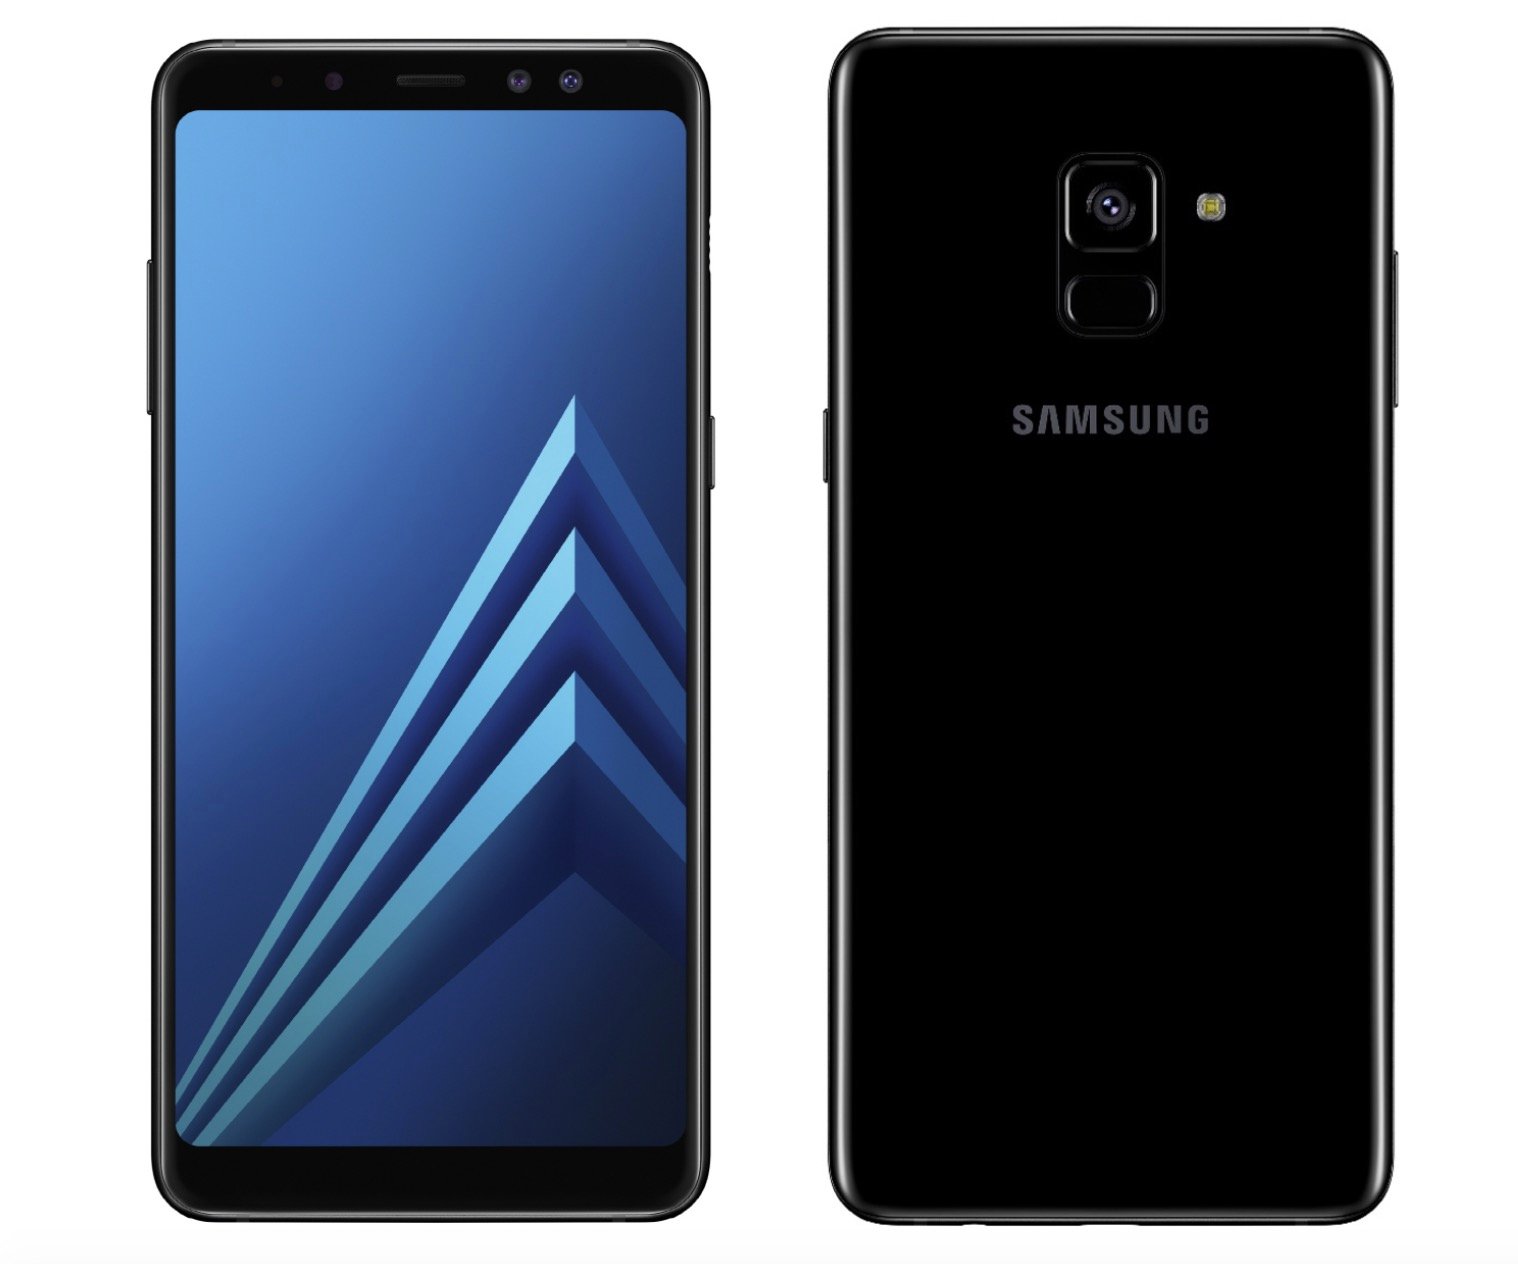 Samsung Galaxy A8 What You Need to Know